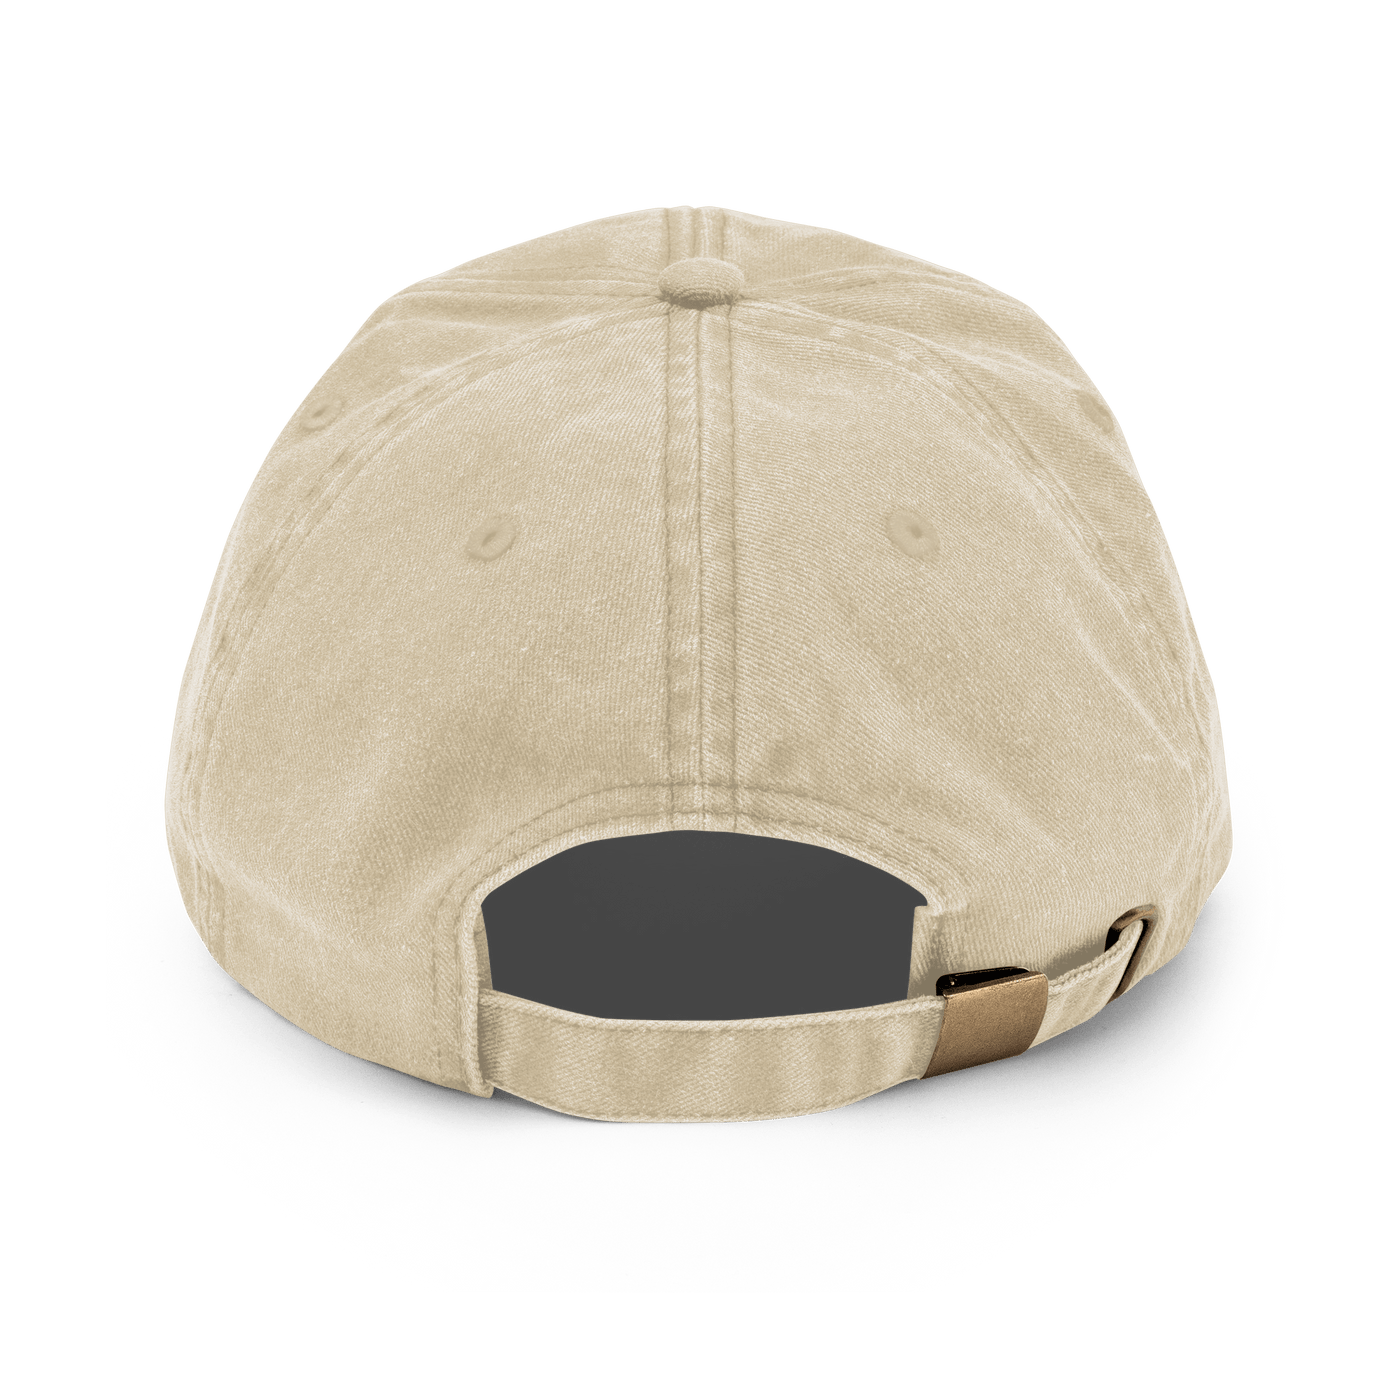 FIKA Vintage Hat - Vintage Stone - - Just Another Cap Store